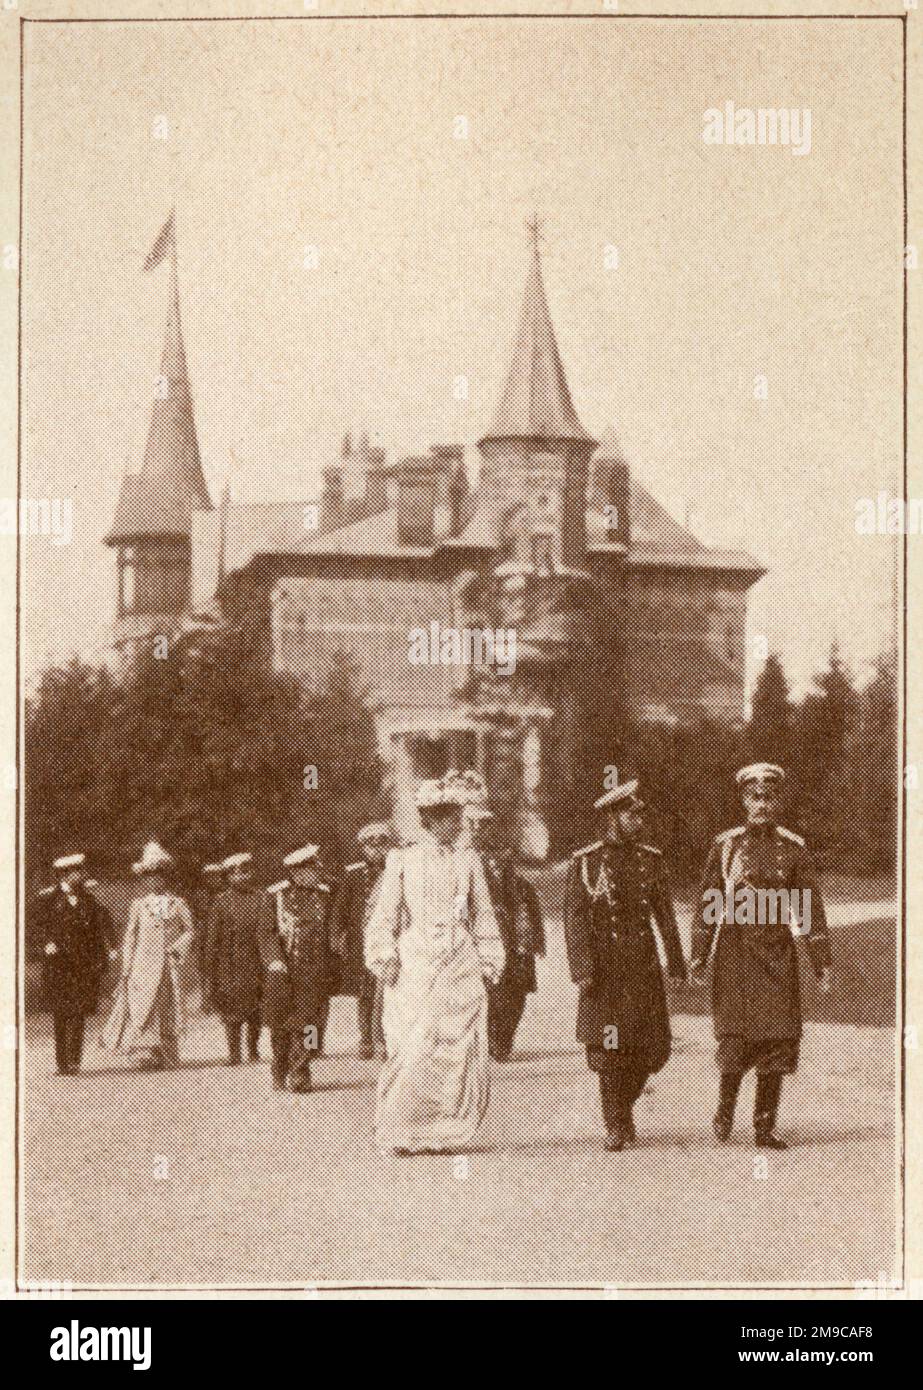 Russia - Tsar Nicholas II and Tsarina Alexandra Feodorovna in the Bialowieza Forest on the border between Belarus and Poland in 1912. The Palace/Grand Hunting Lodge built by Tsar Alexander III can be seen in the background. Stock Photo